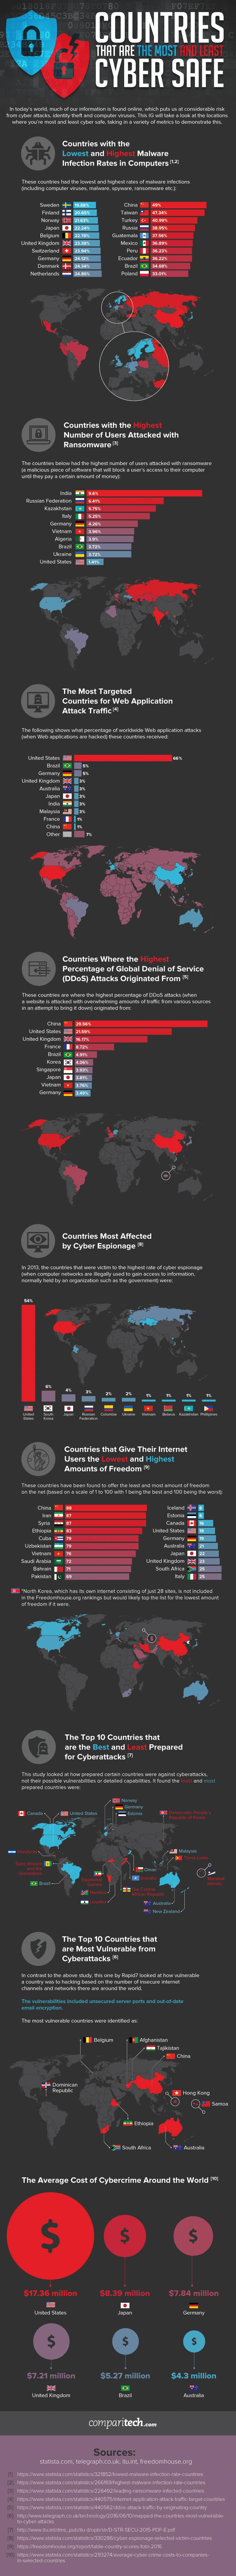 Cyber security statistics by country